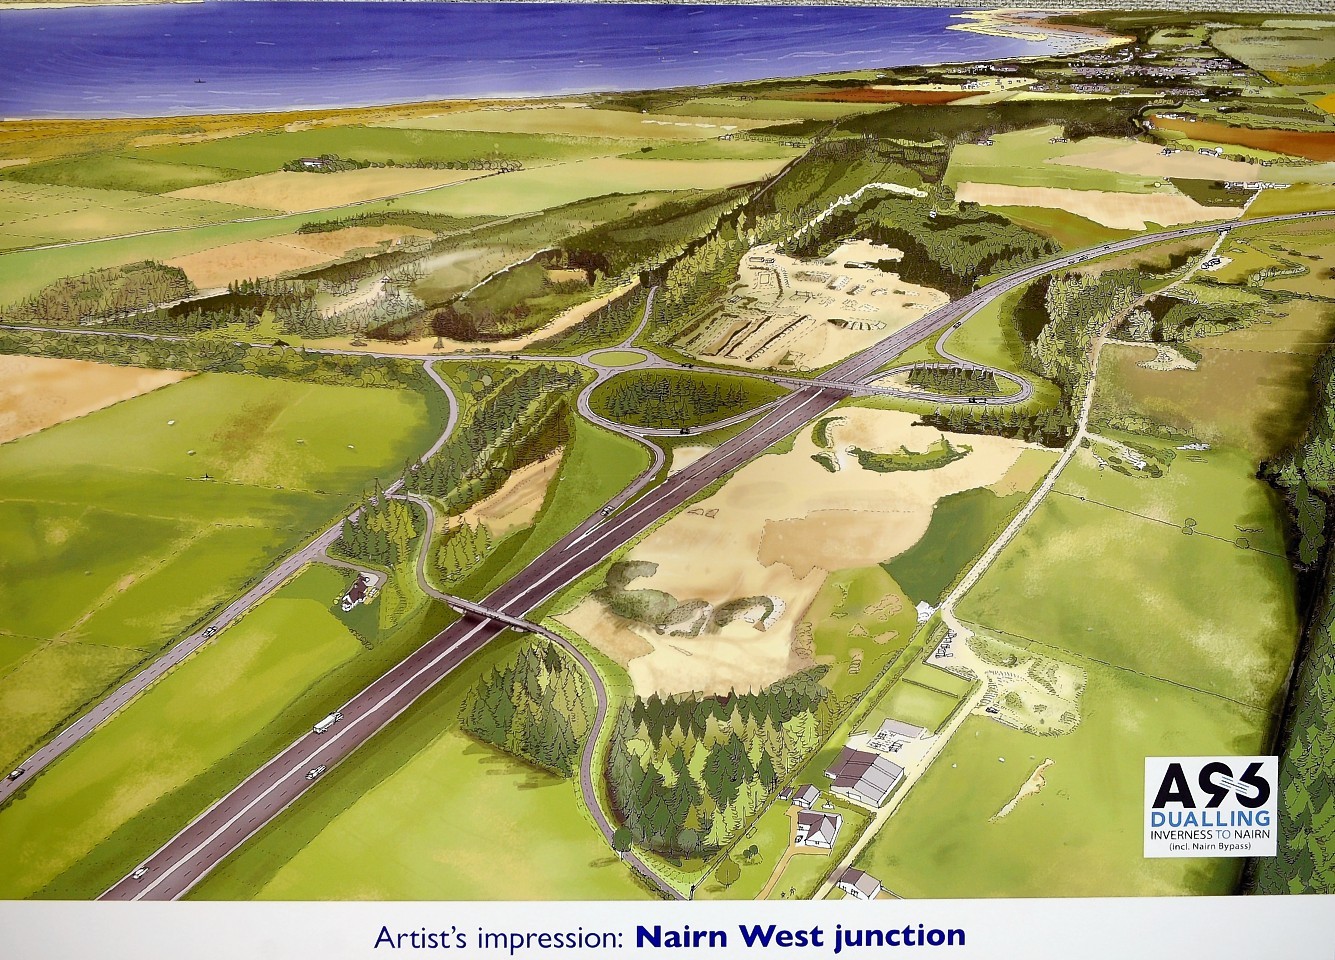 An artist's impression of a new junction west of Nairn as part of the bypass plans